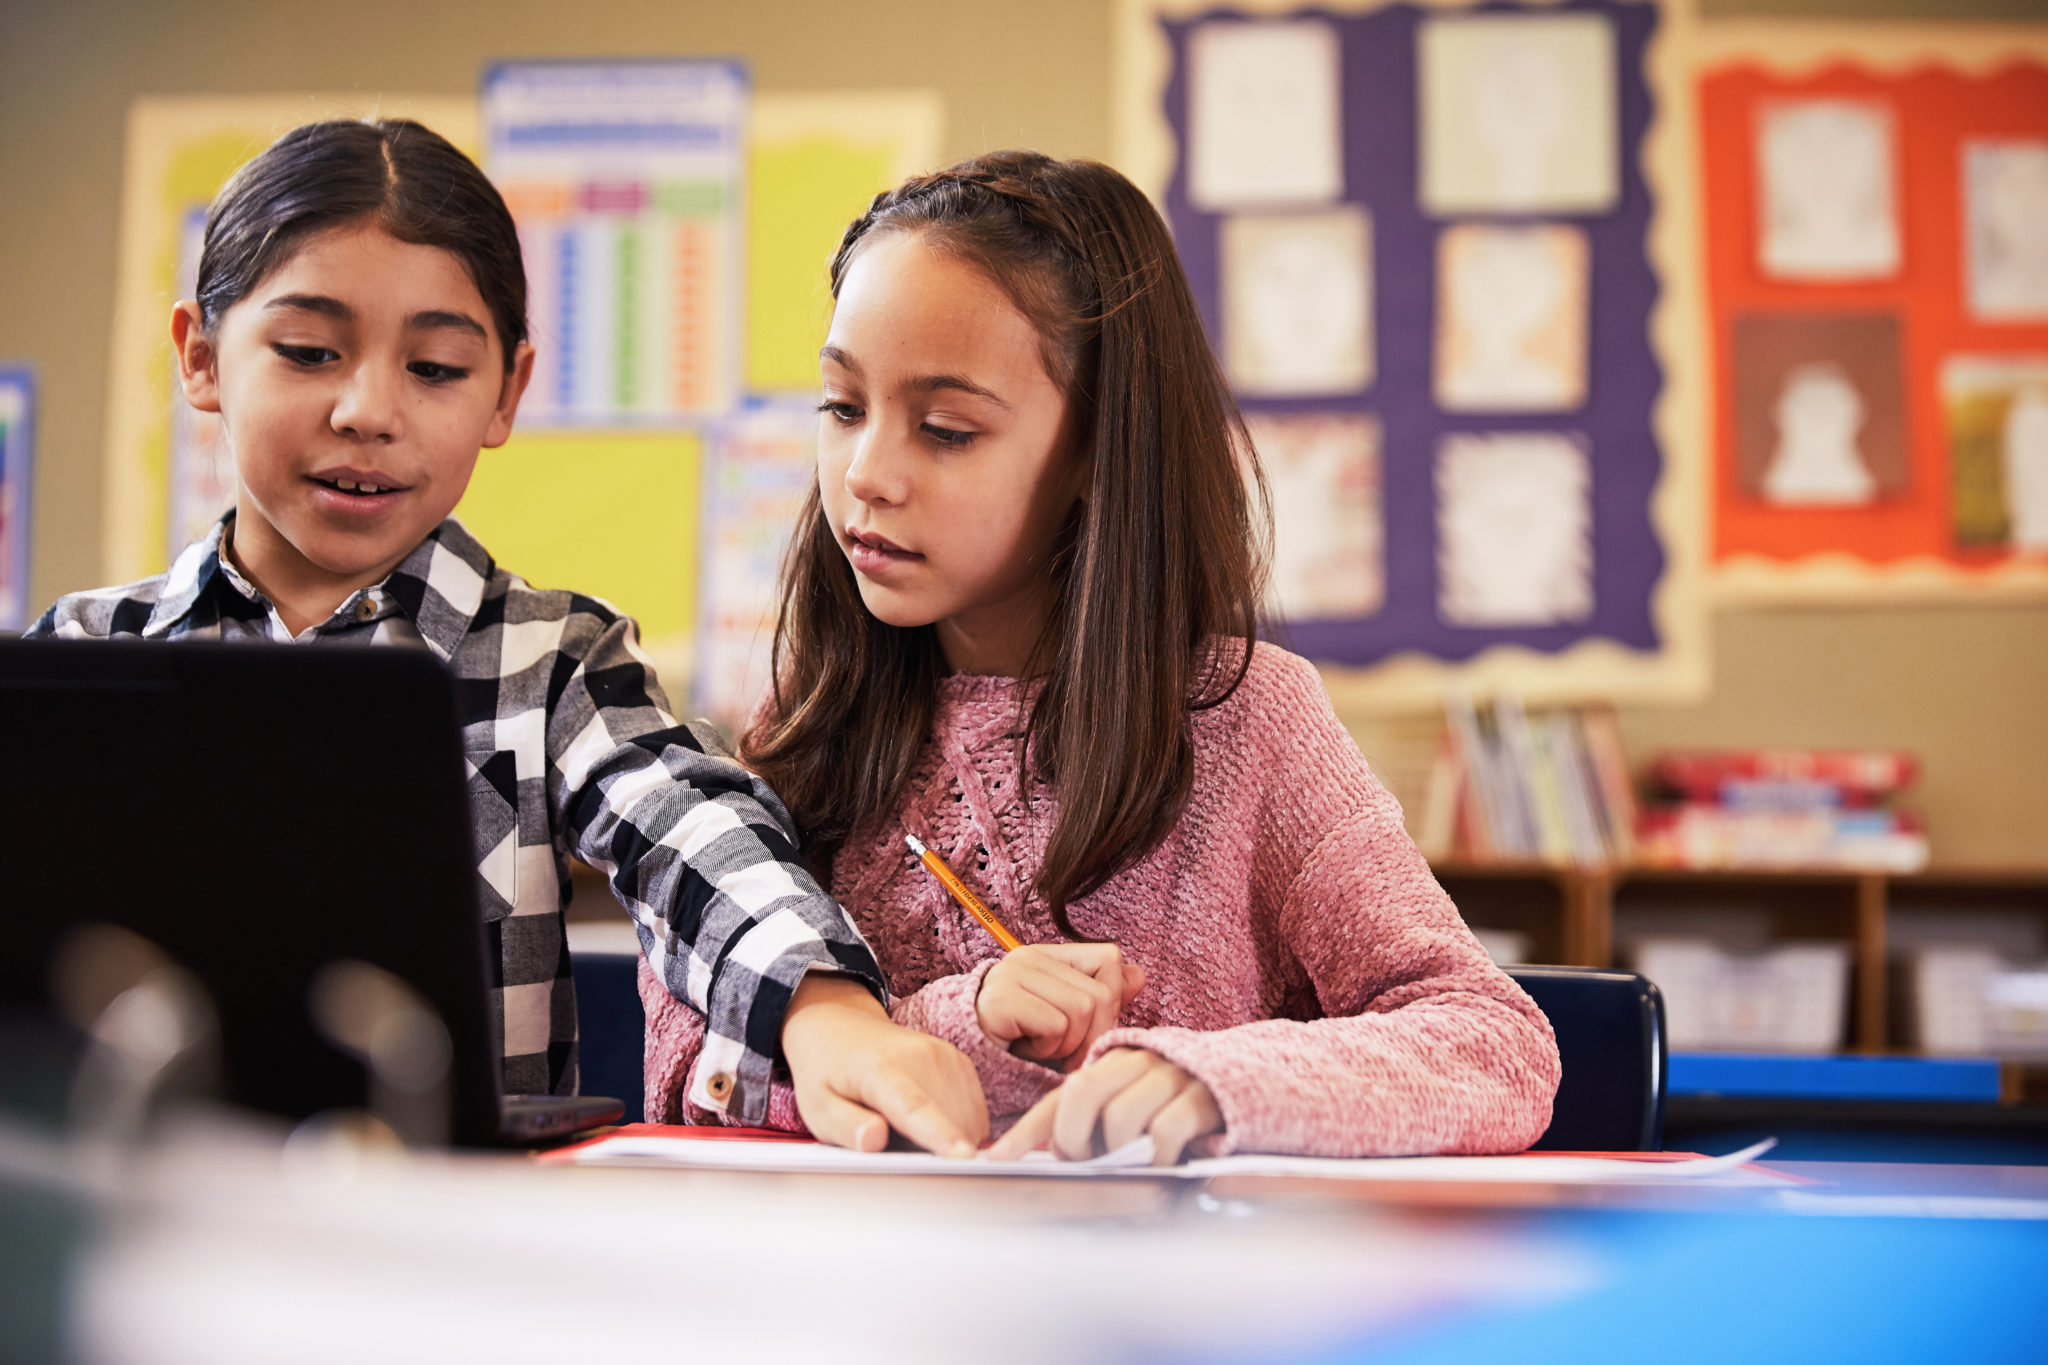 Microsoft Education unveils new Windows 10 devices starting at $189, Office 365 tools for personalized learning, and curricula to ignite a passion for STEM